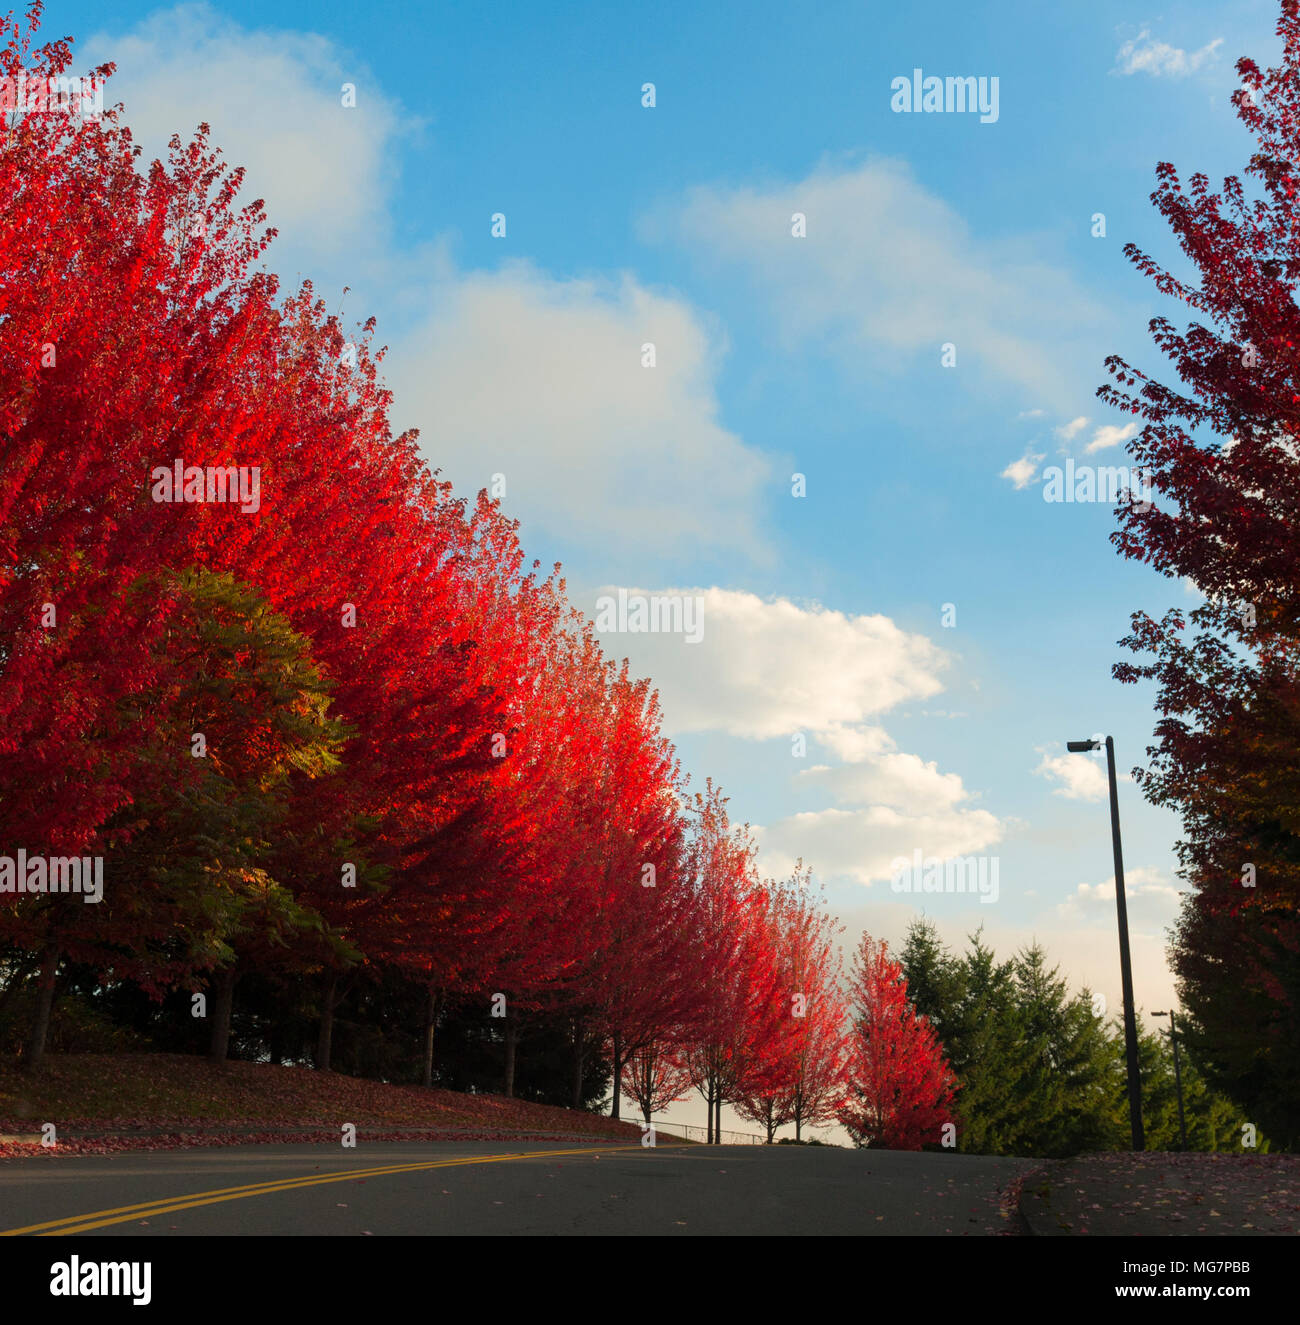 Autumn red leaves on trees line a road the sky is blue with white clouds. Stock Photo